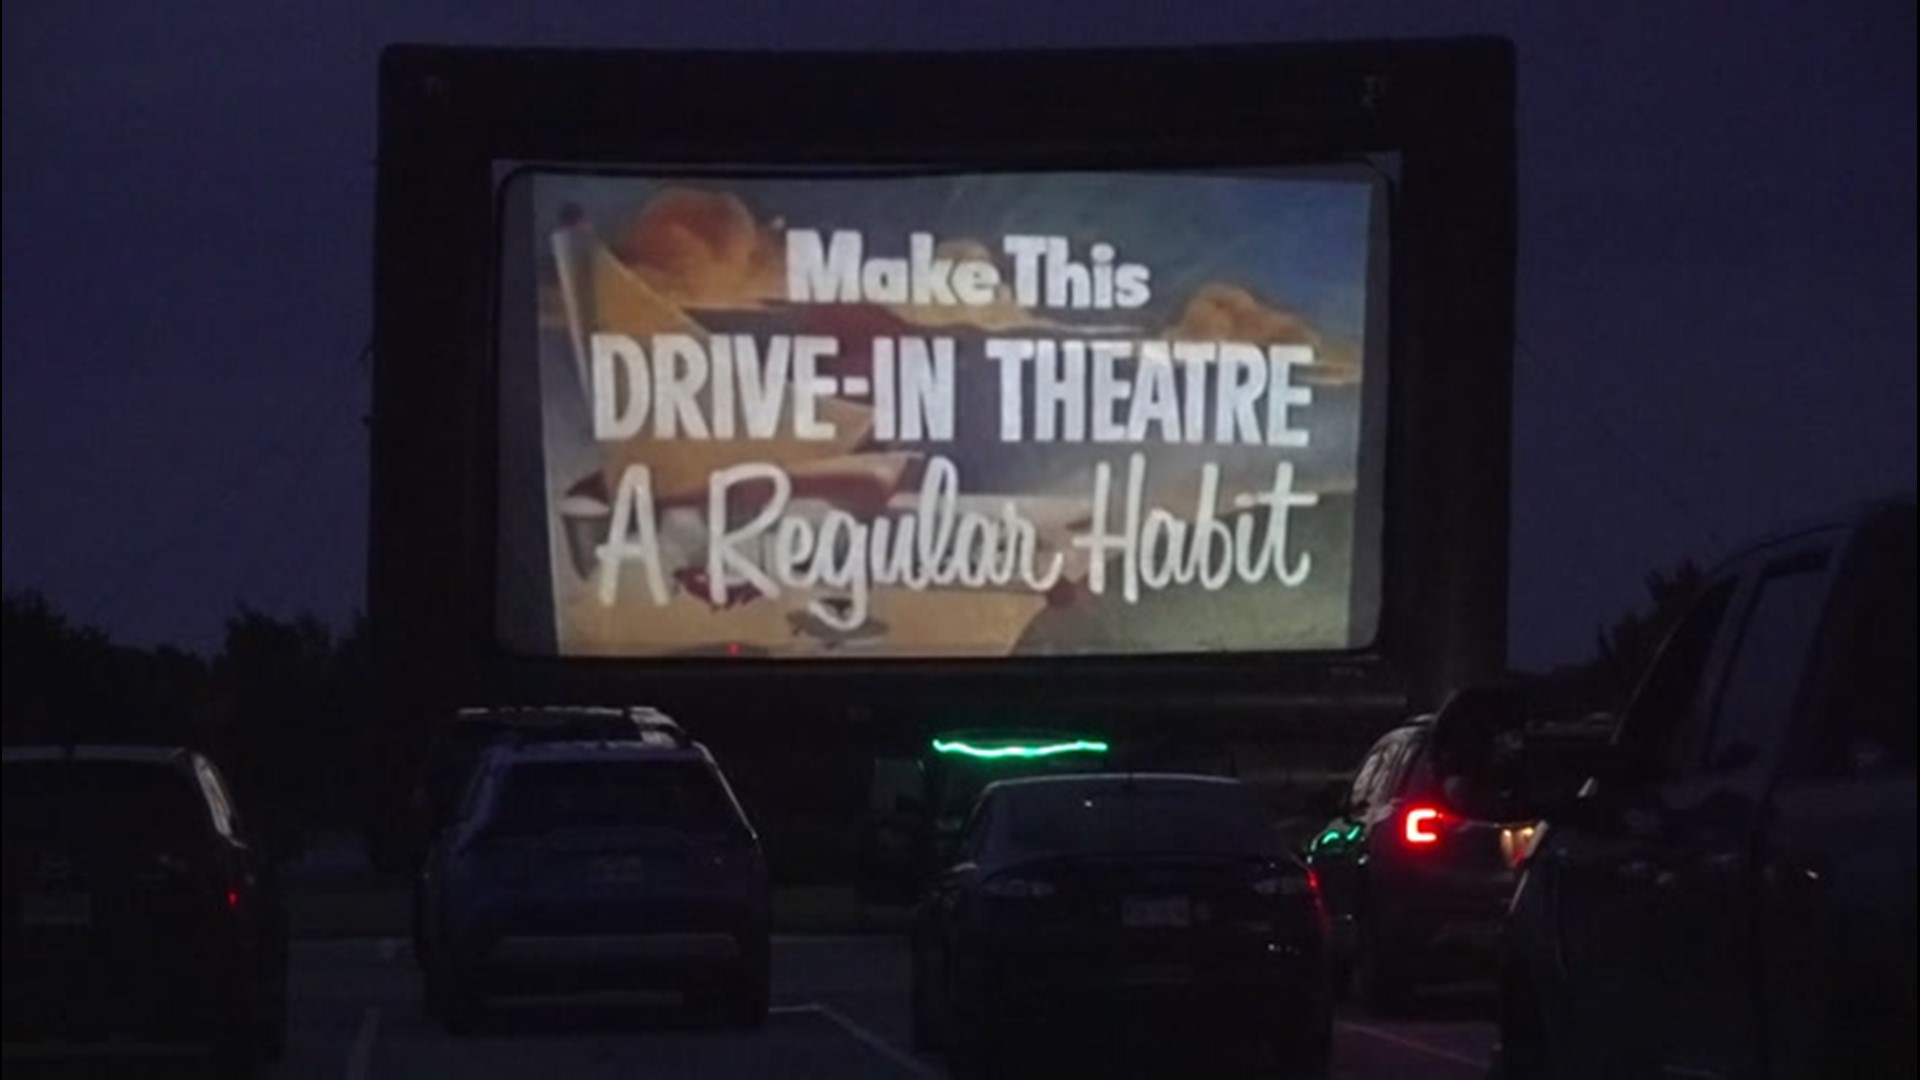 The American pastime of drive-in movies is growing in popularity during the COVID-19 pandemic, with many indoor theaters and entertainment businesses closed.